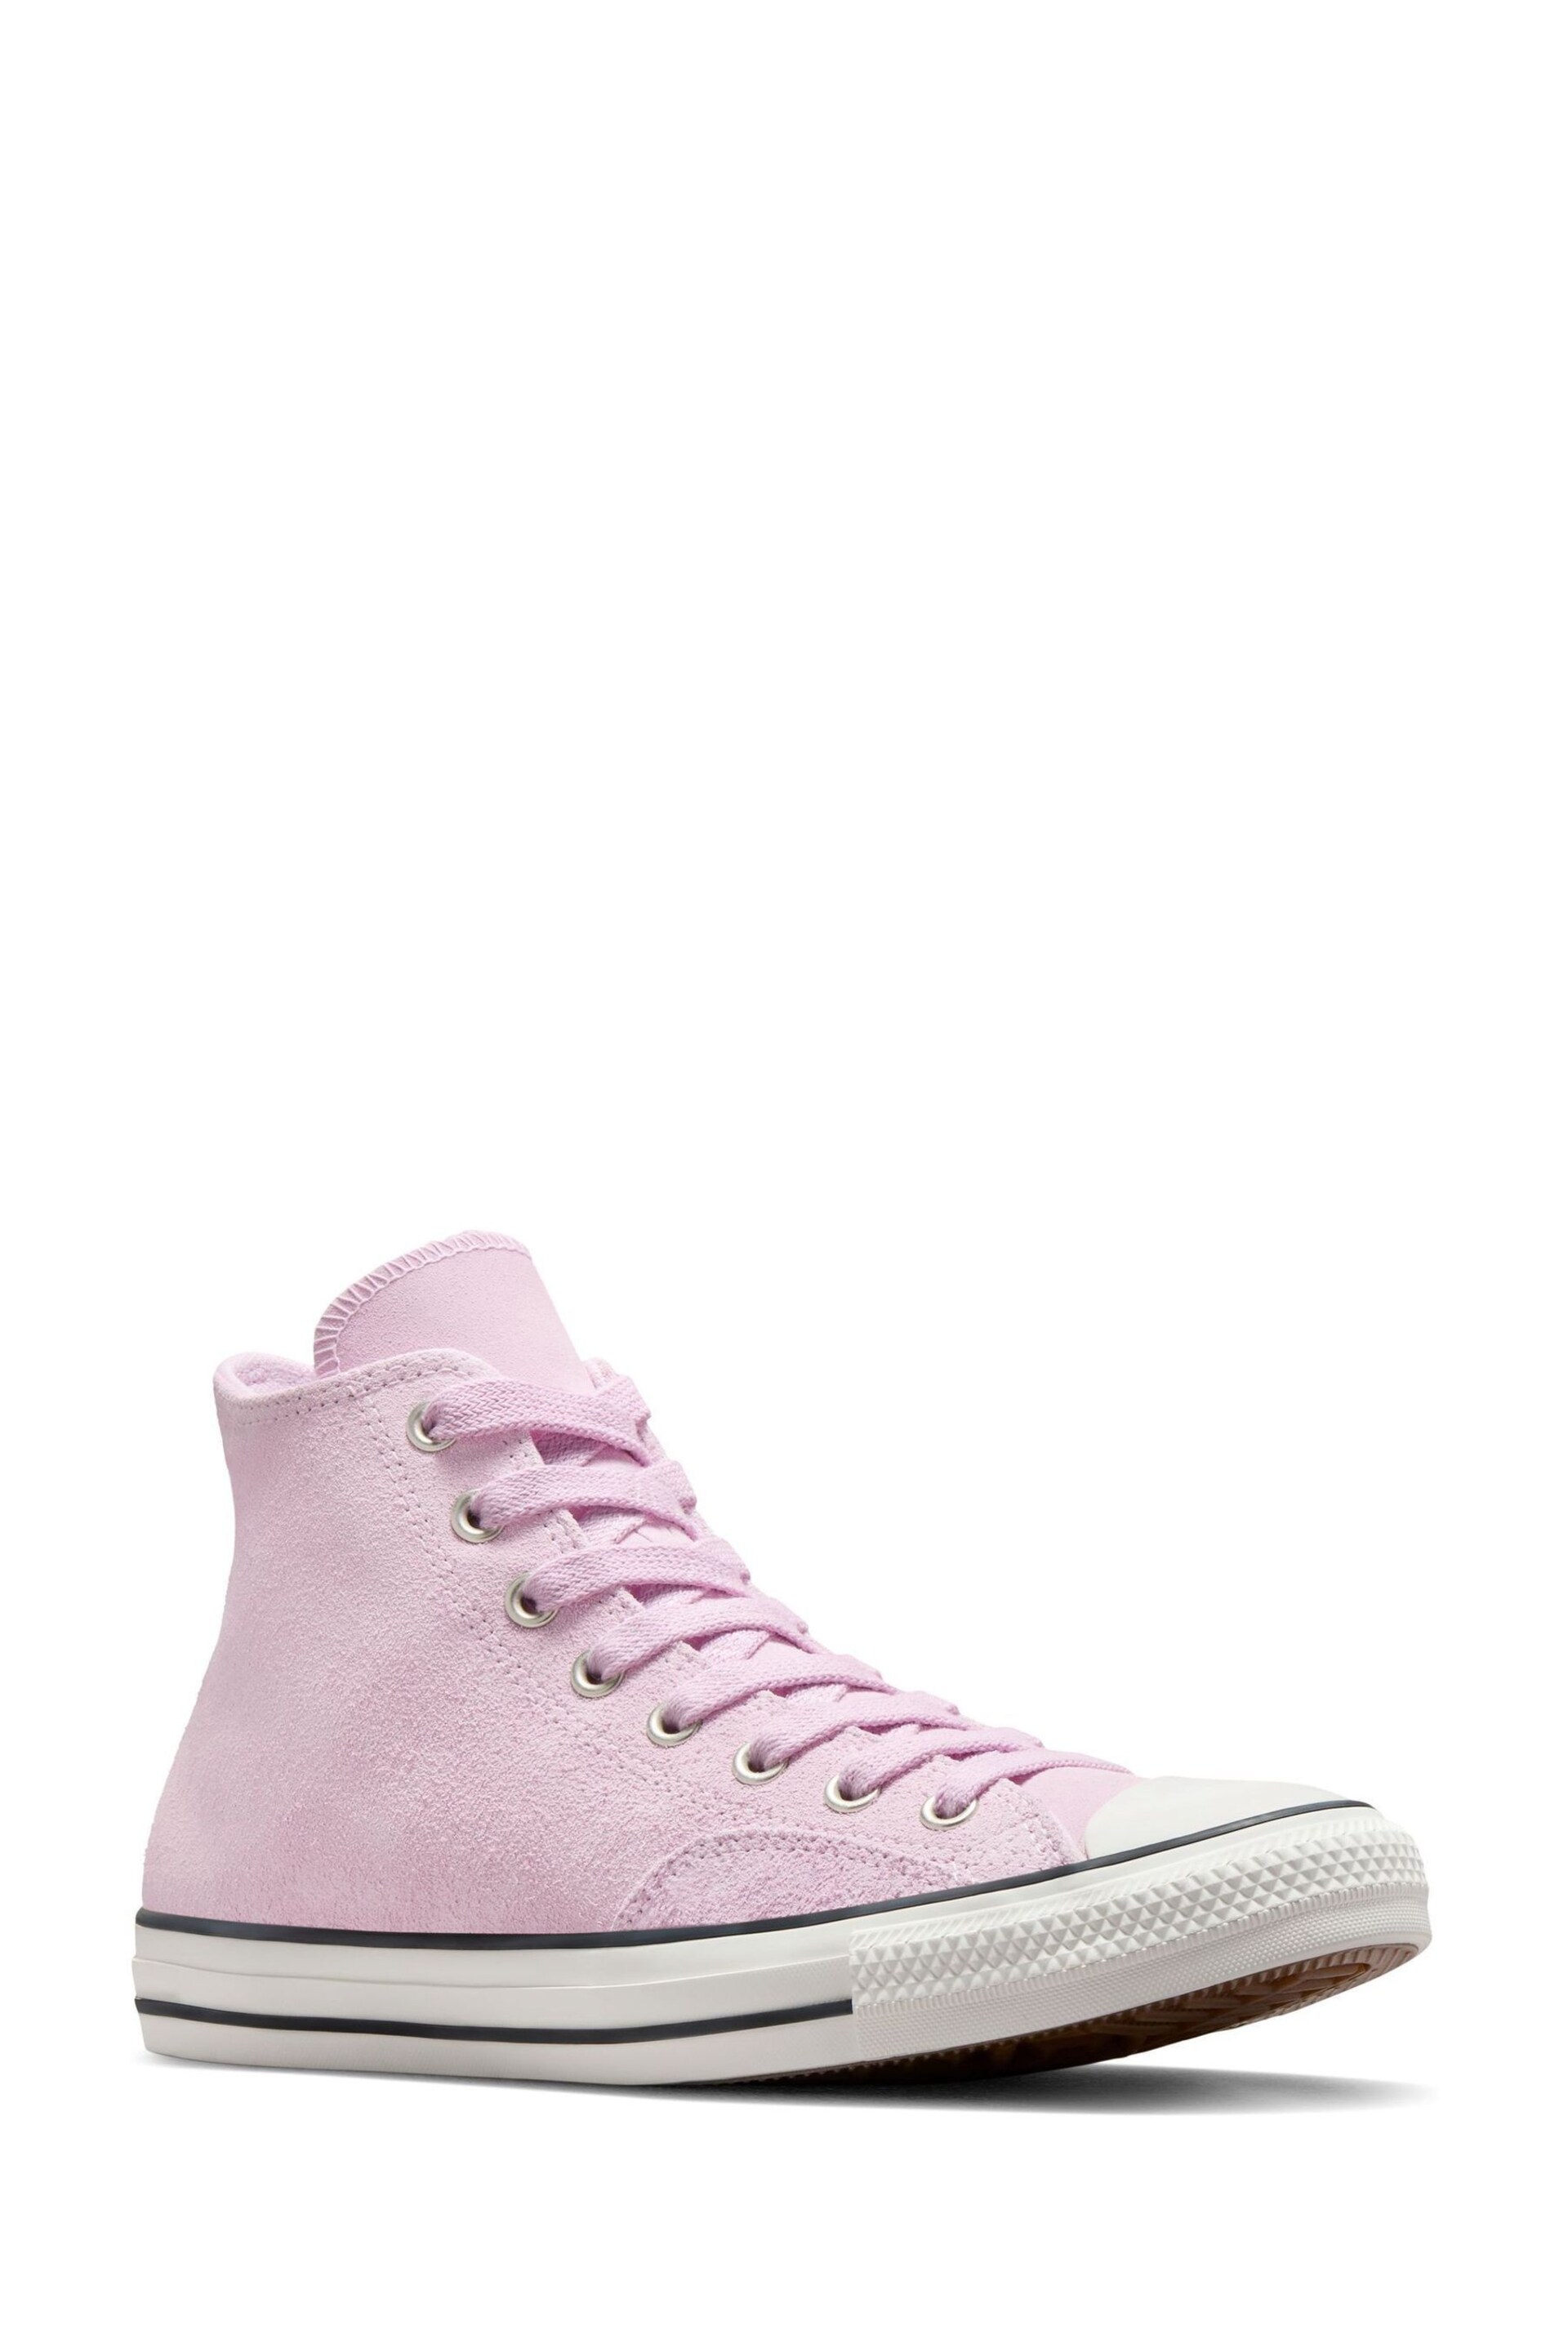 Converse Purple Chuck Taylor All Star High Trainers - Image 10 of 10